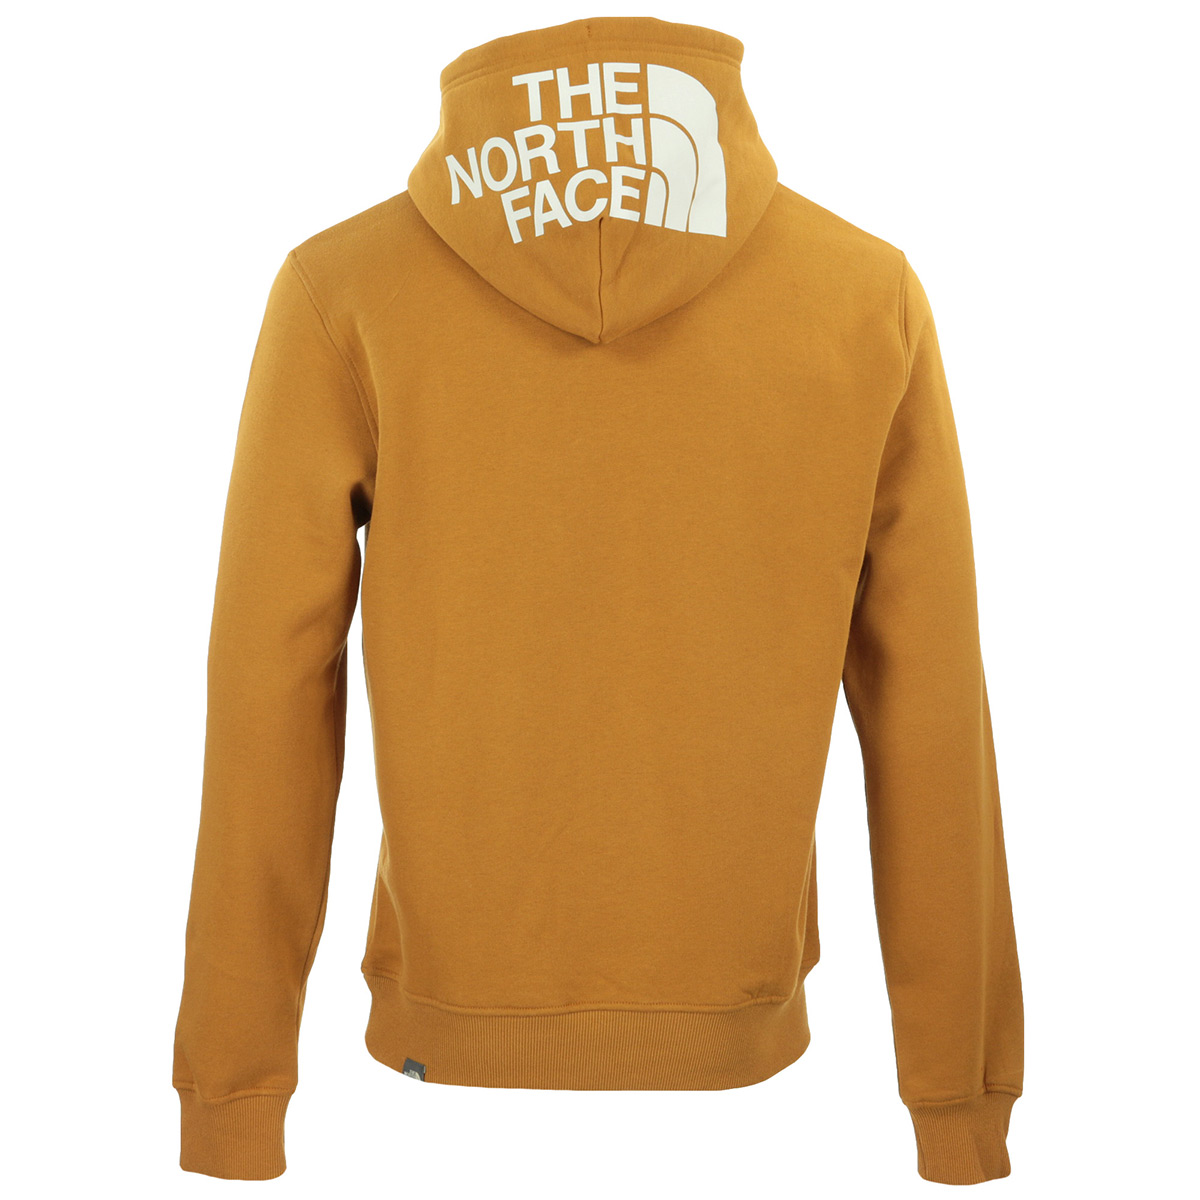 The North Face Seasonal Drew Peak NF0A2TUVVC7, Sweats homme